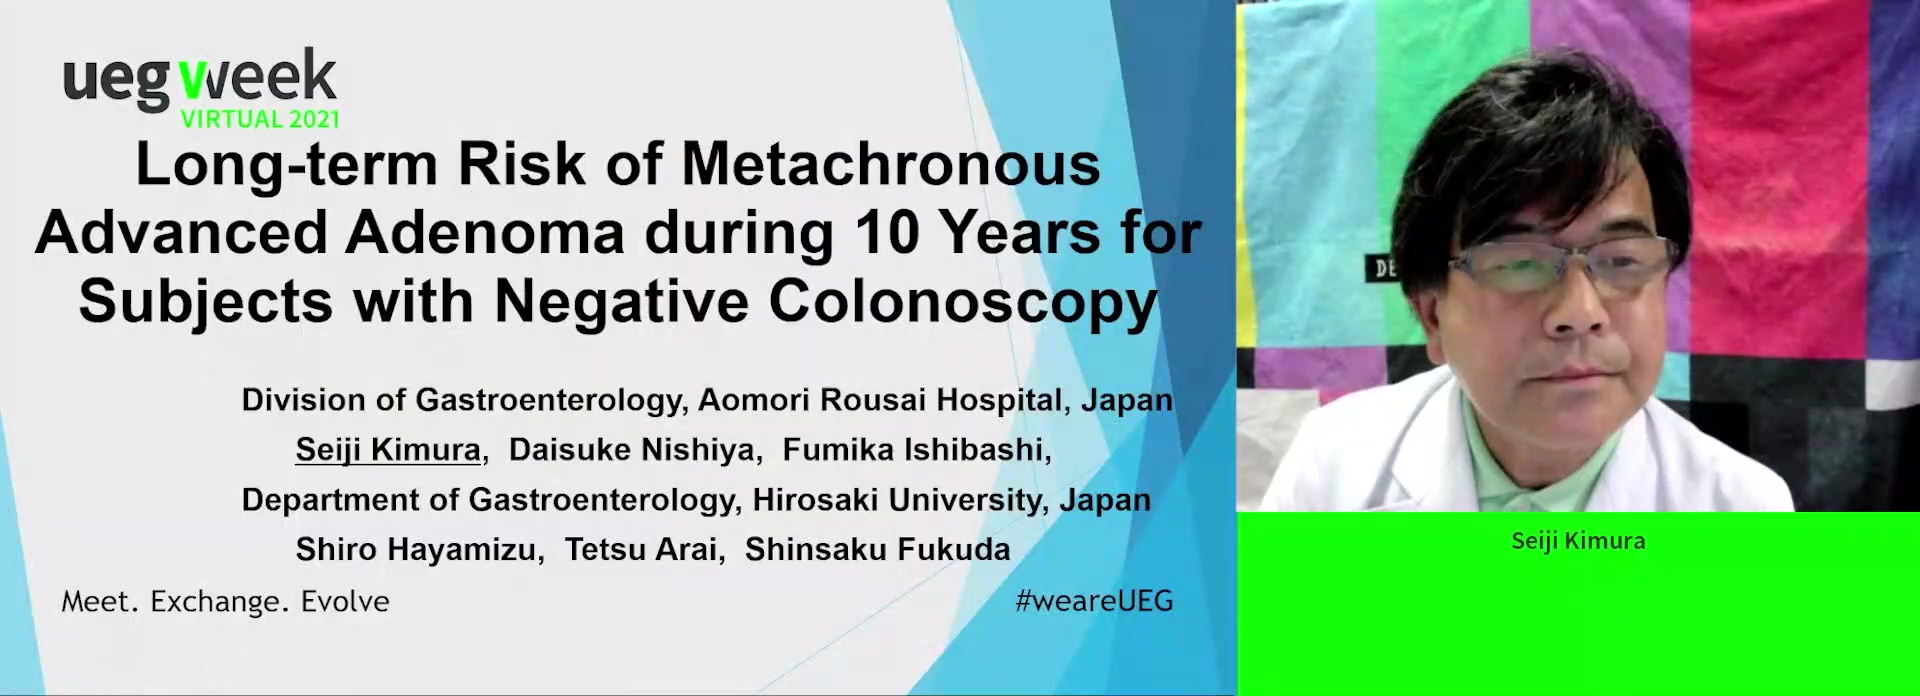 LONG-TERM RISK OF METACHRONOUS ADVANCED ADENOMA DURING 10 YEARS FOR SUBJECTS WITH NEGATIVE COLONOSCOPY